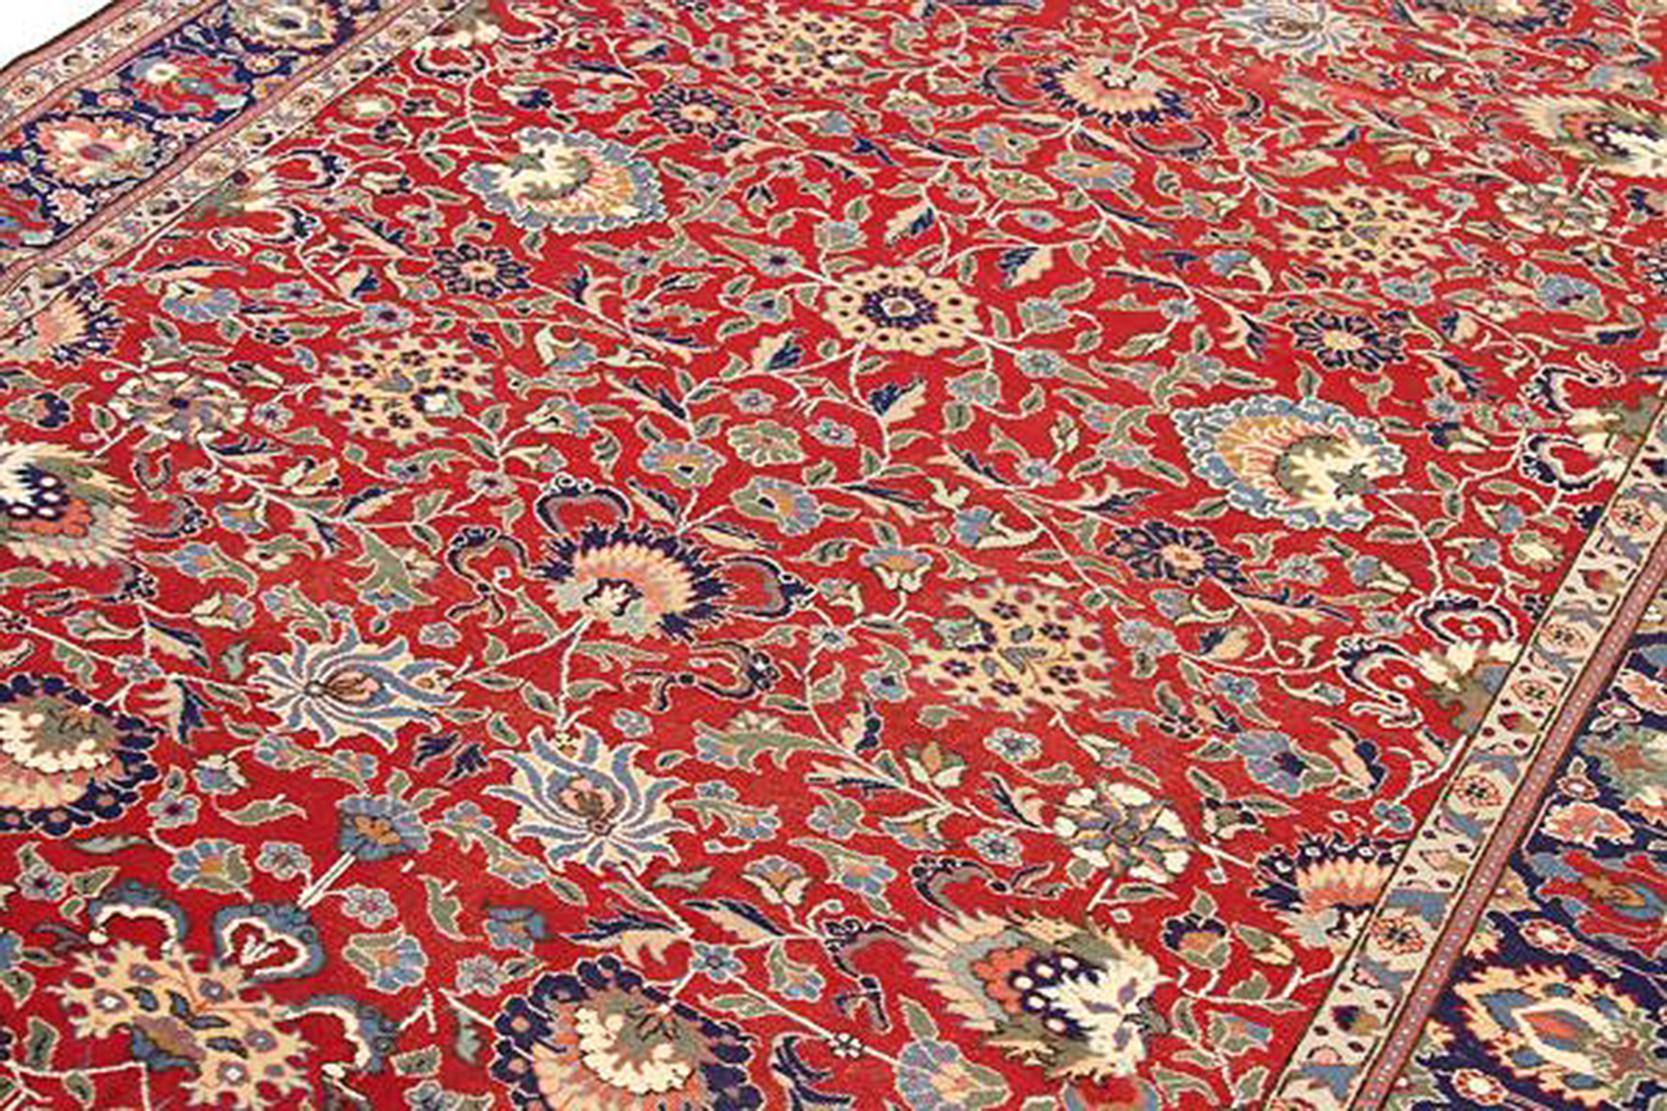 Islamic 1920s Turkish Sivas Rug with Navy and Gray Floral Motifs on Red Field For Sale